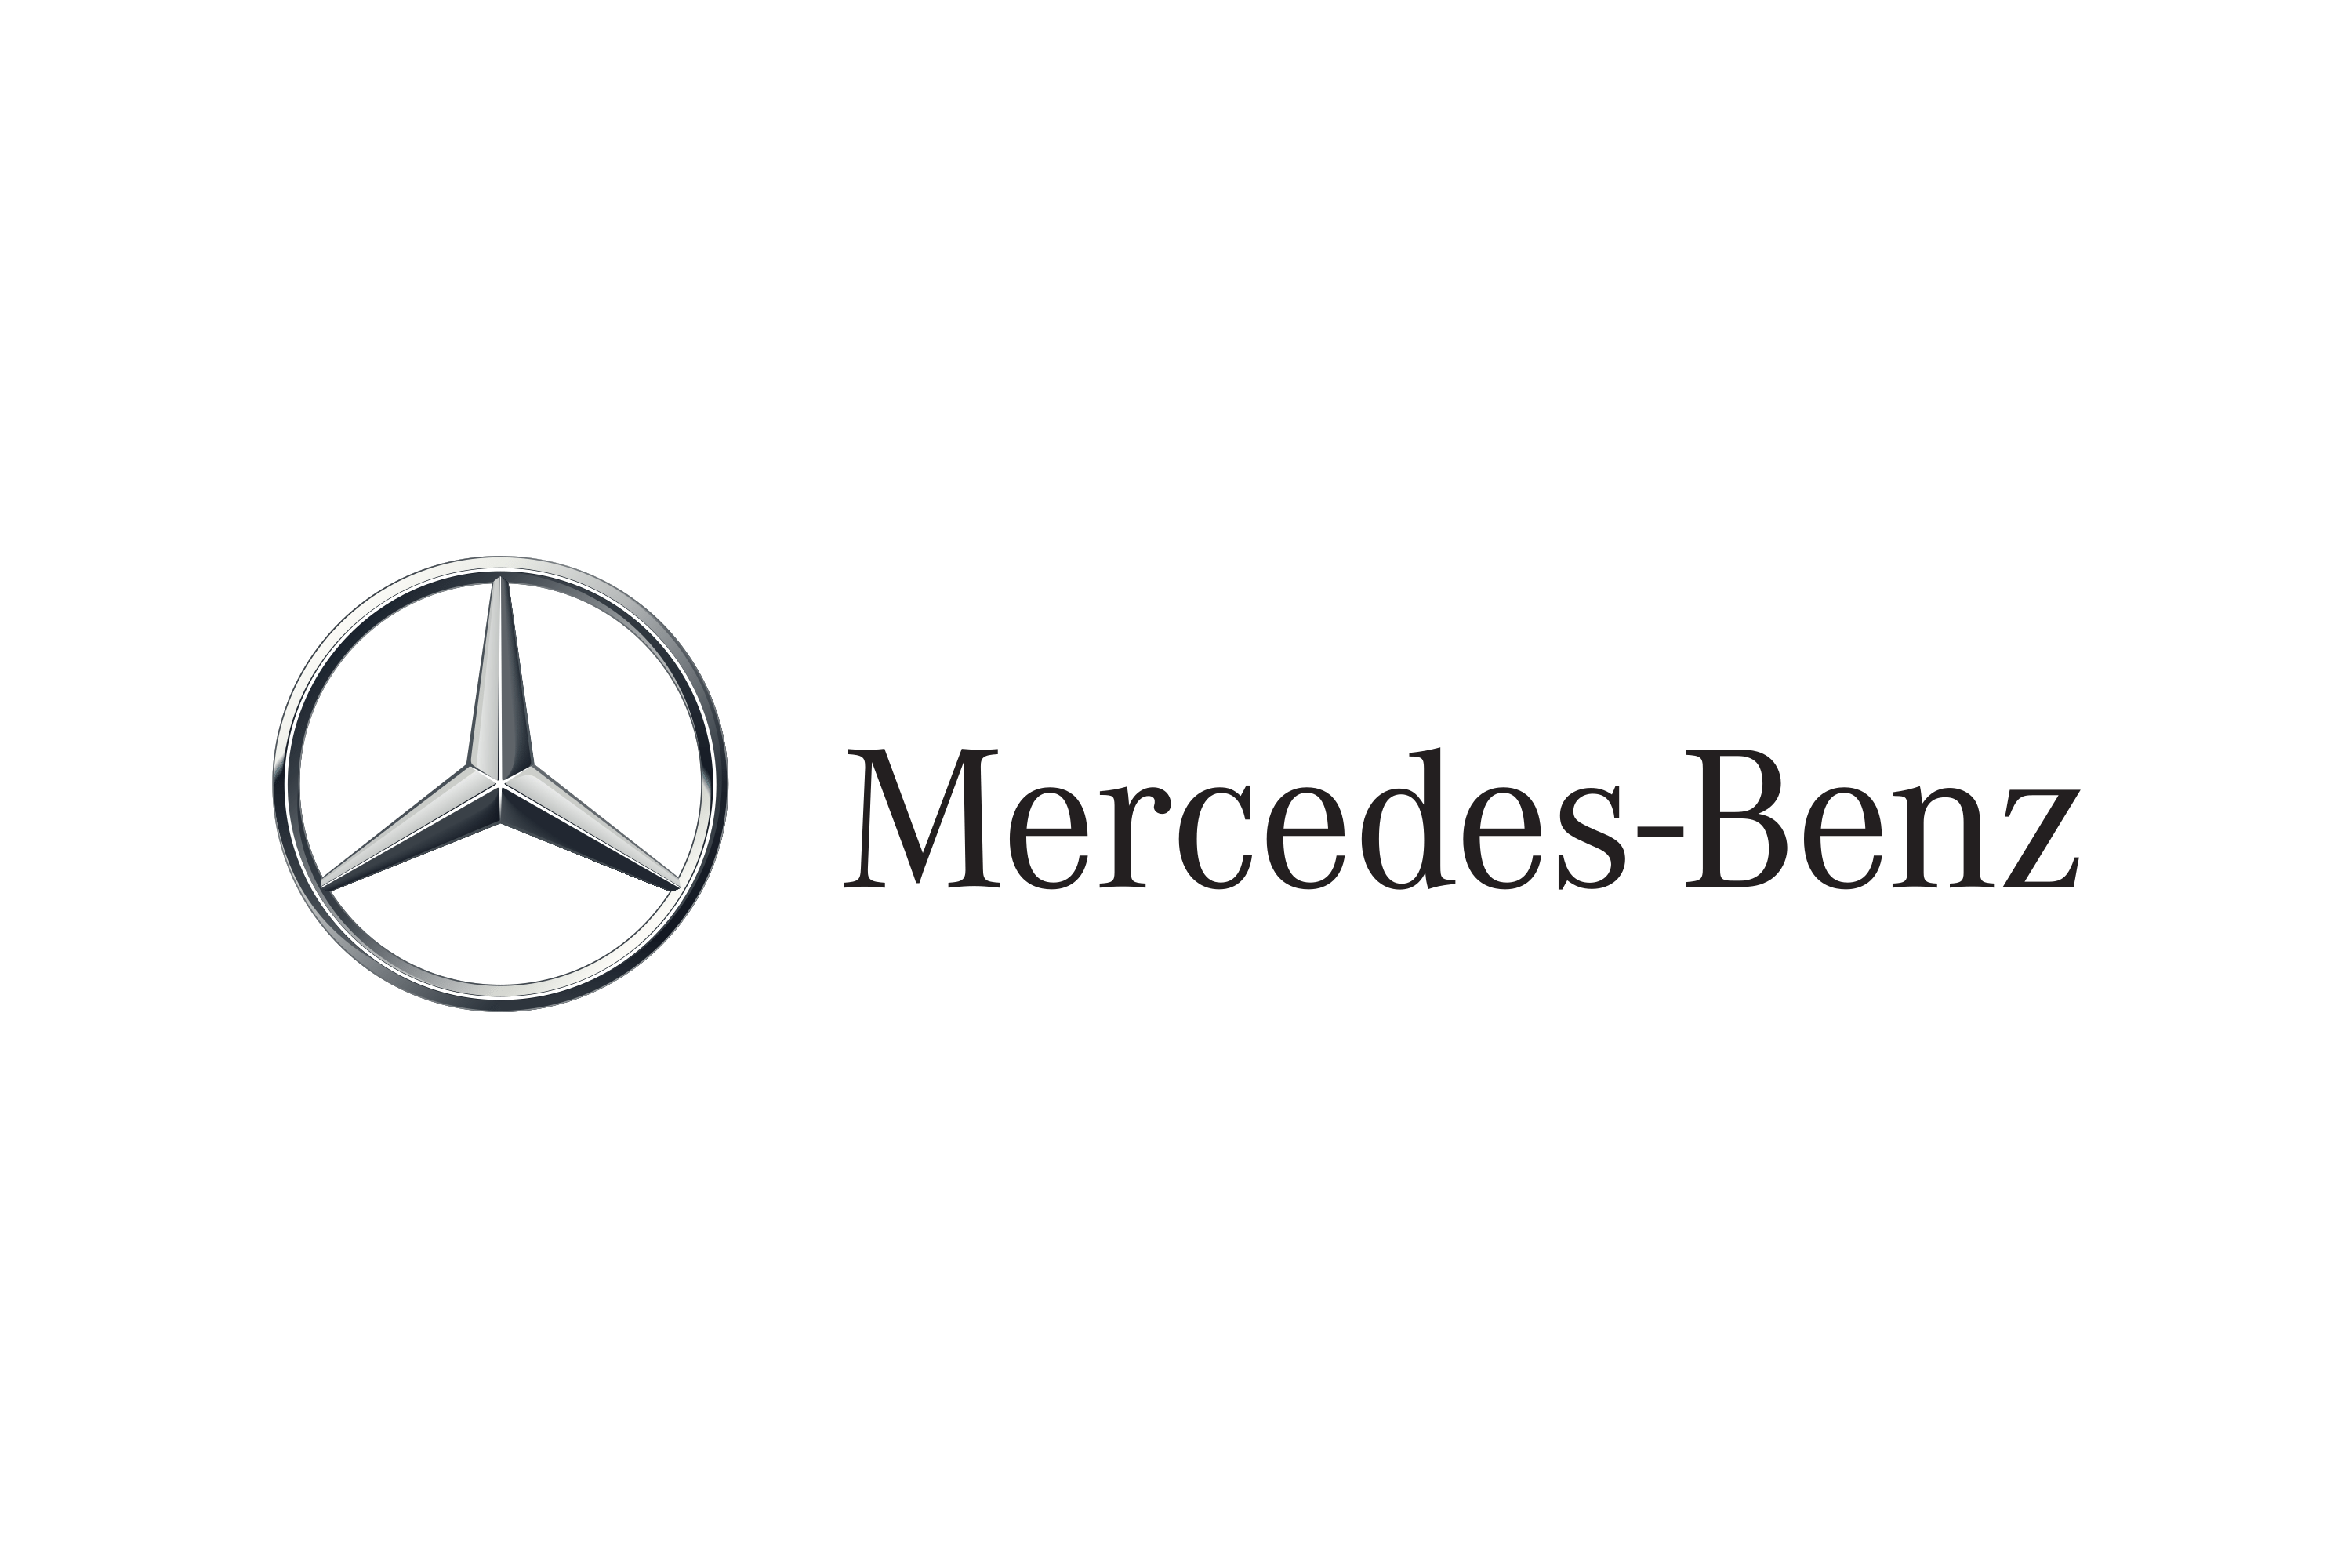 Mercedes-Benz Logo and sign, new logo meaning and history, PNG, SVG